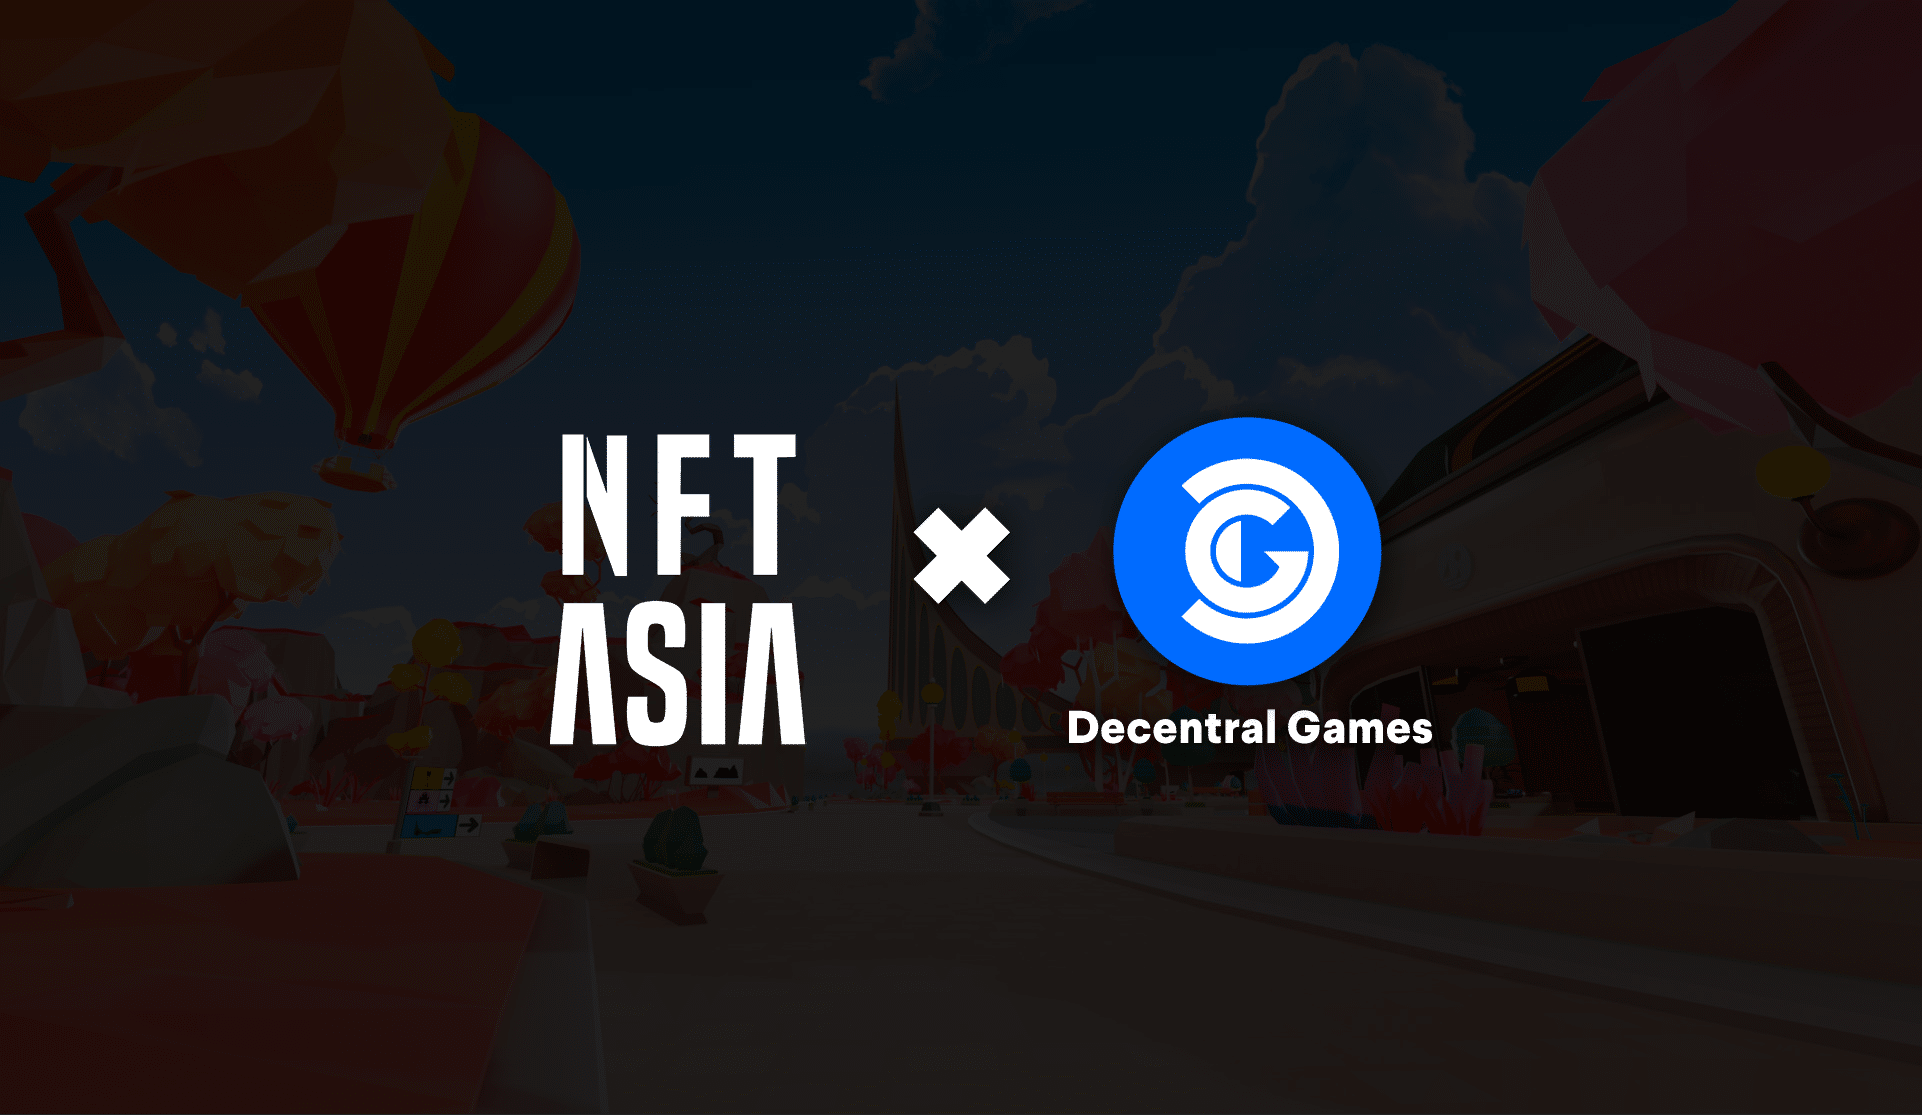 NFT Asia and Decentral Games logos